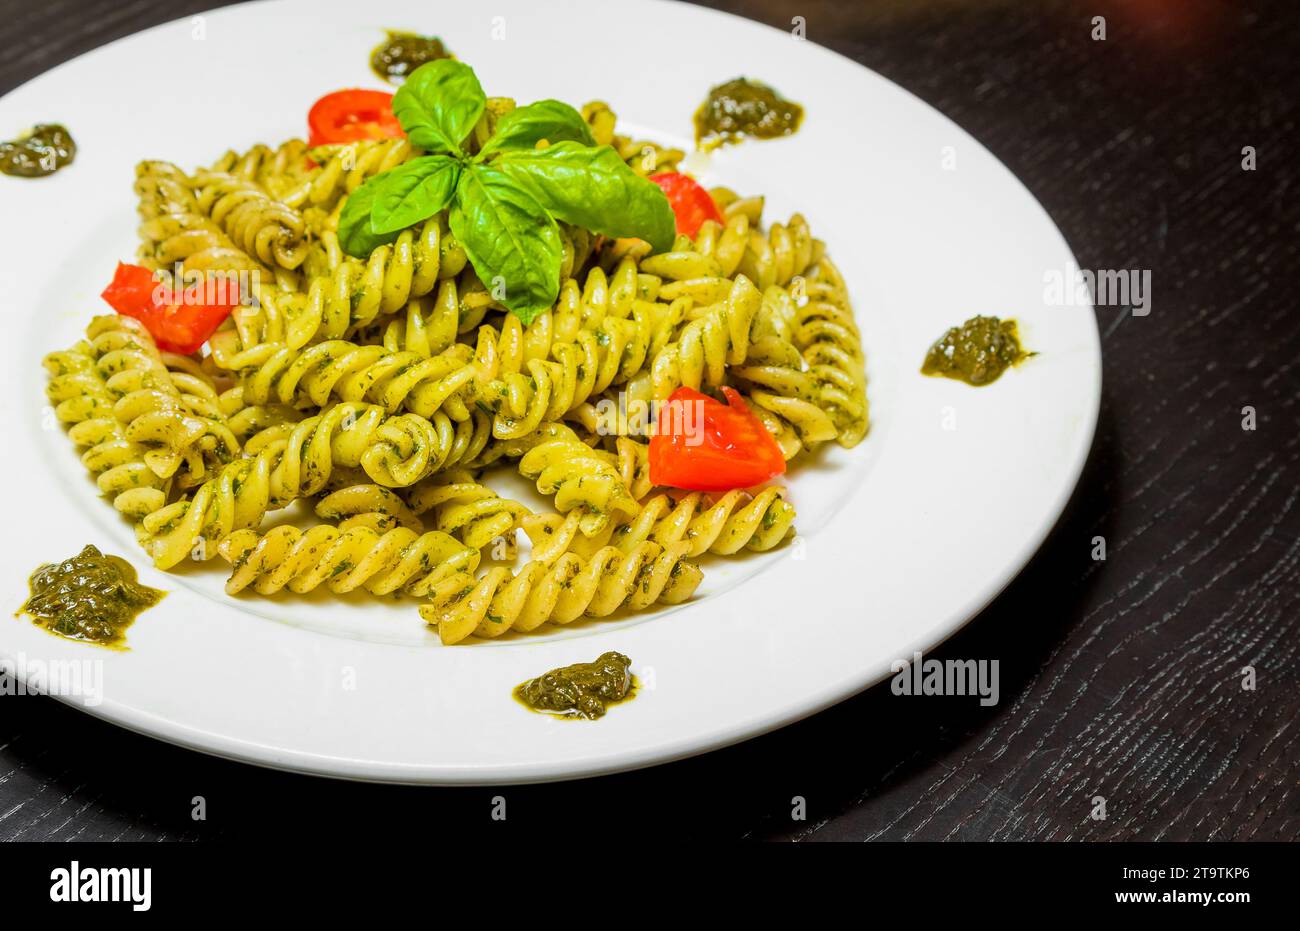 dish of pasta with pesto genovese sauce and vegetables, tomato and basil on black wood table Stock Photo